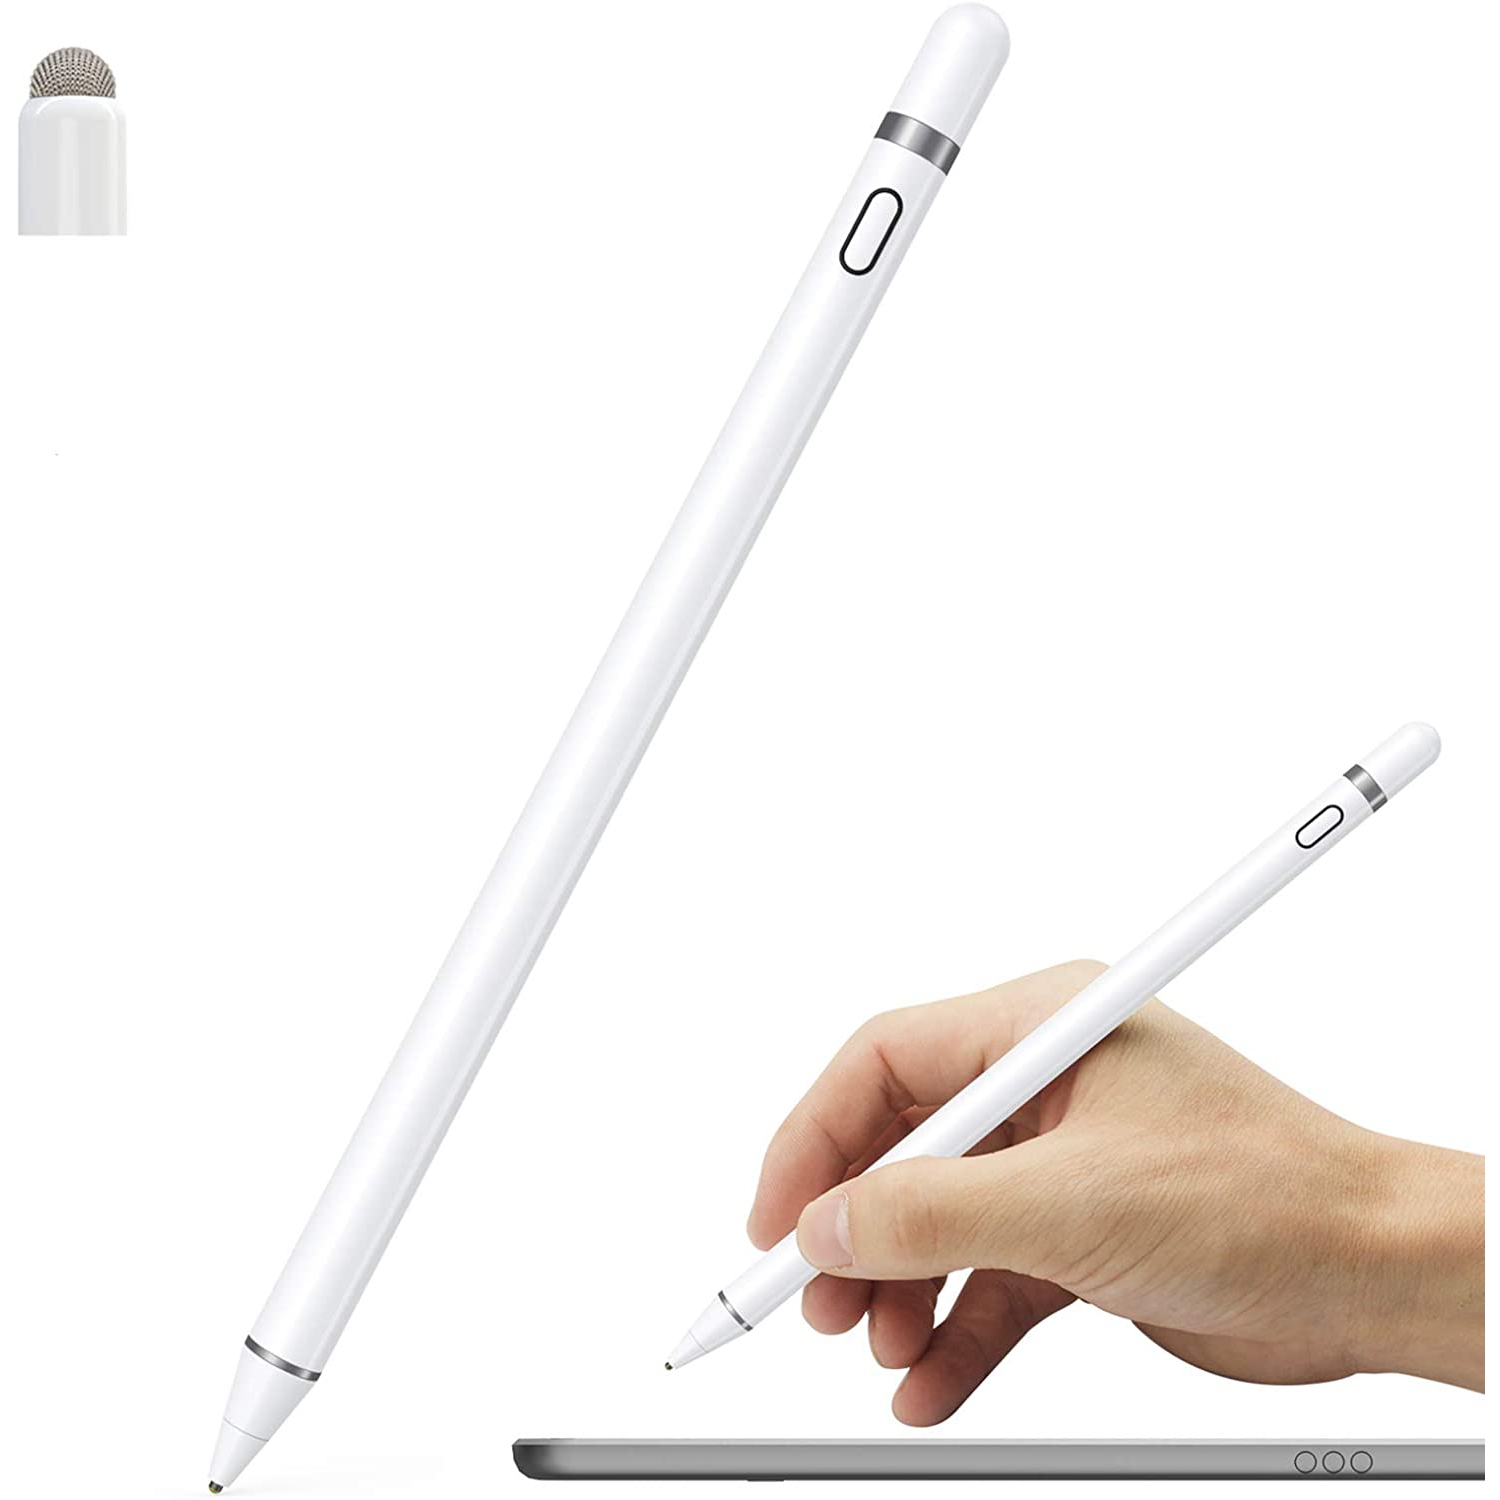 Active Stylus Pen Compatible for iOS and Android Touchscreens, Stylus with Dual Touch Function, Rechargeable Pencil for All Apple iPad/iPhone/iPad Pro/iPad Mini/Android